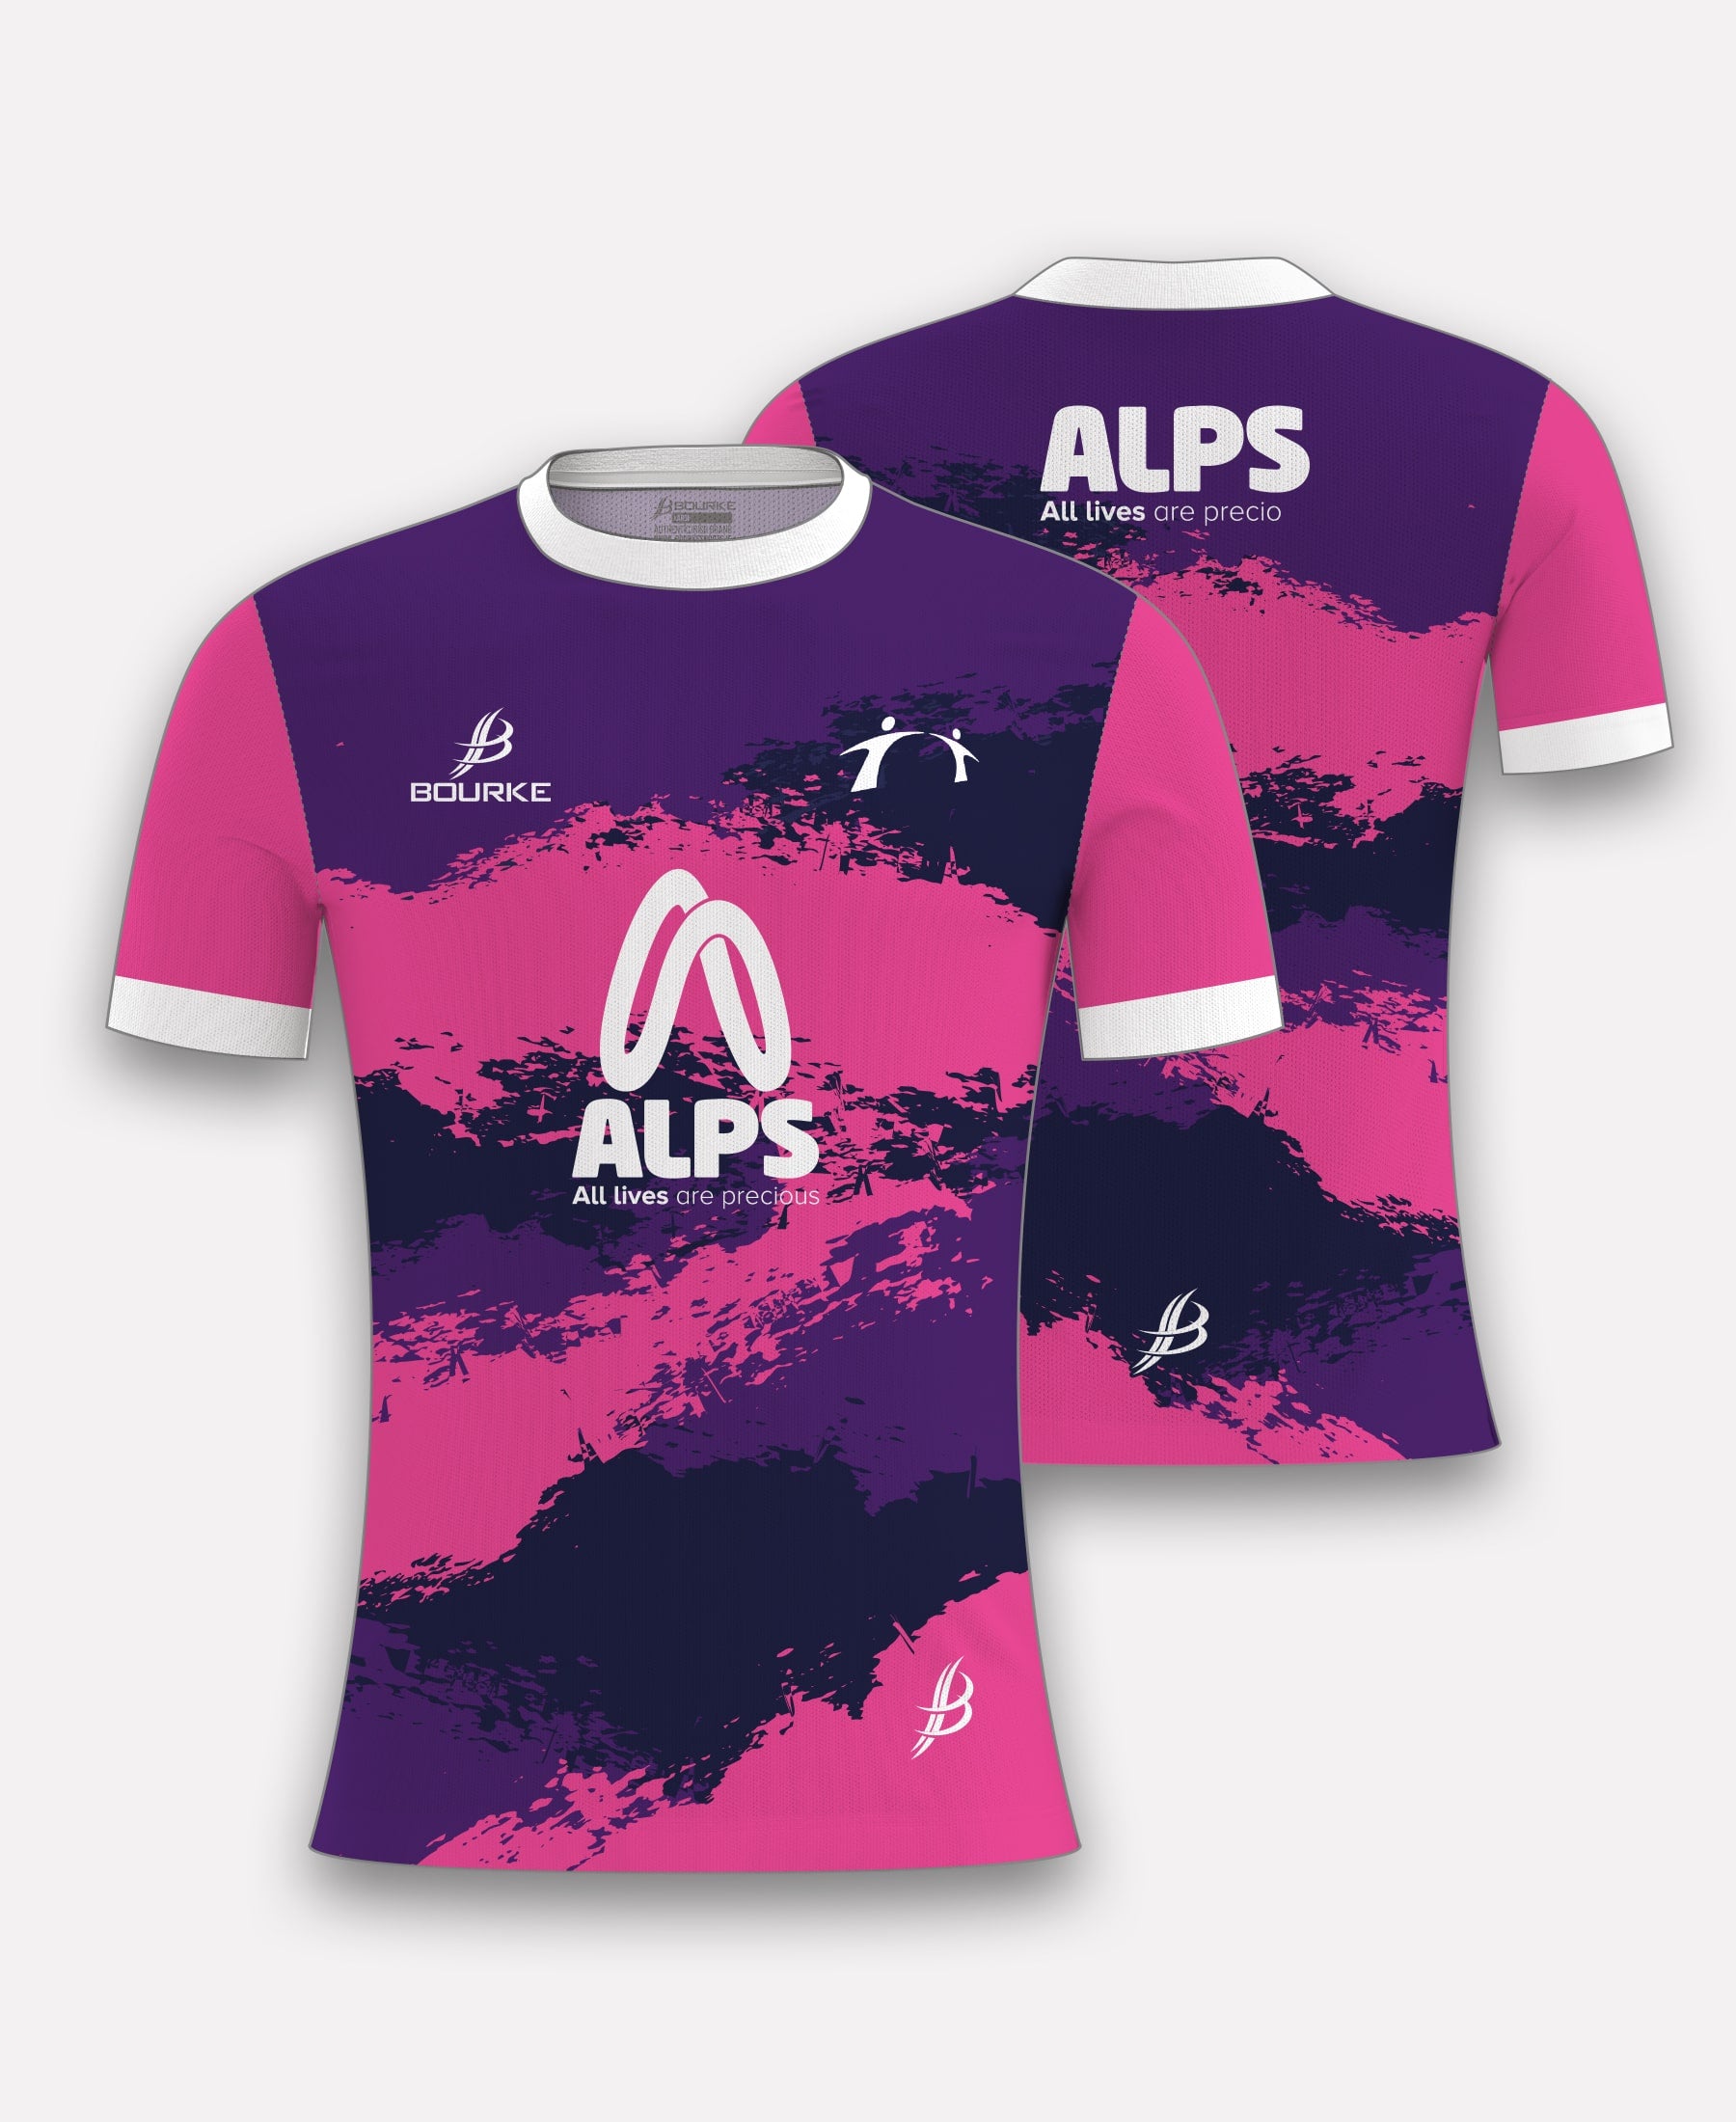 ALPS Jersey (Pink)